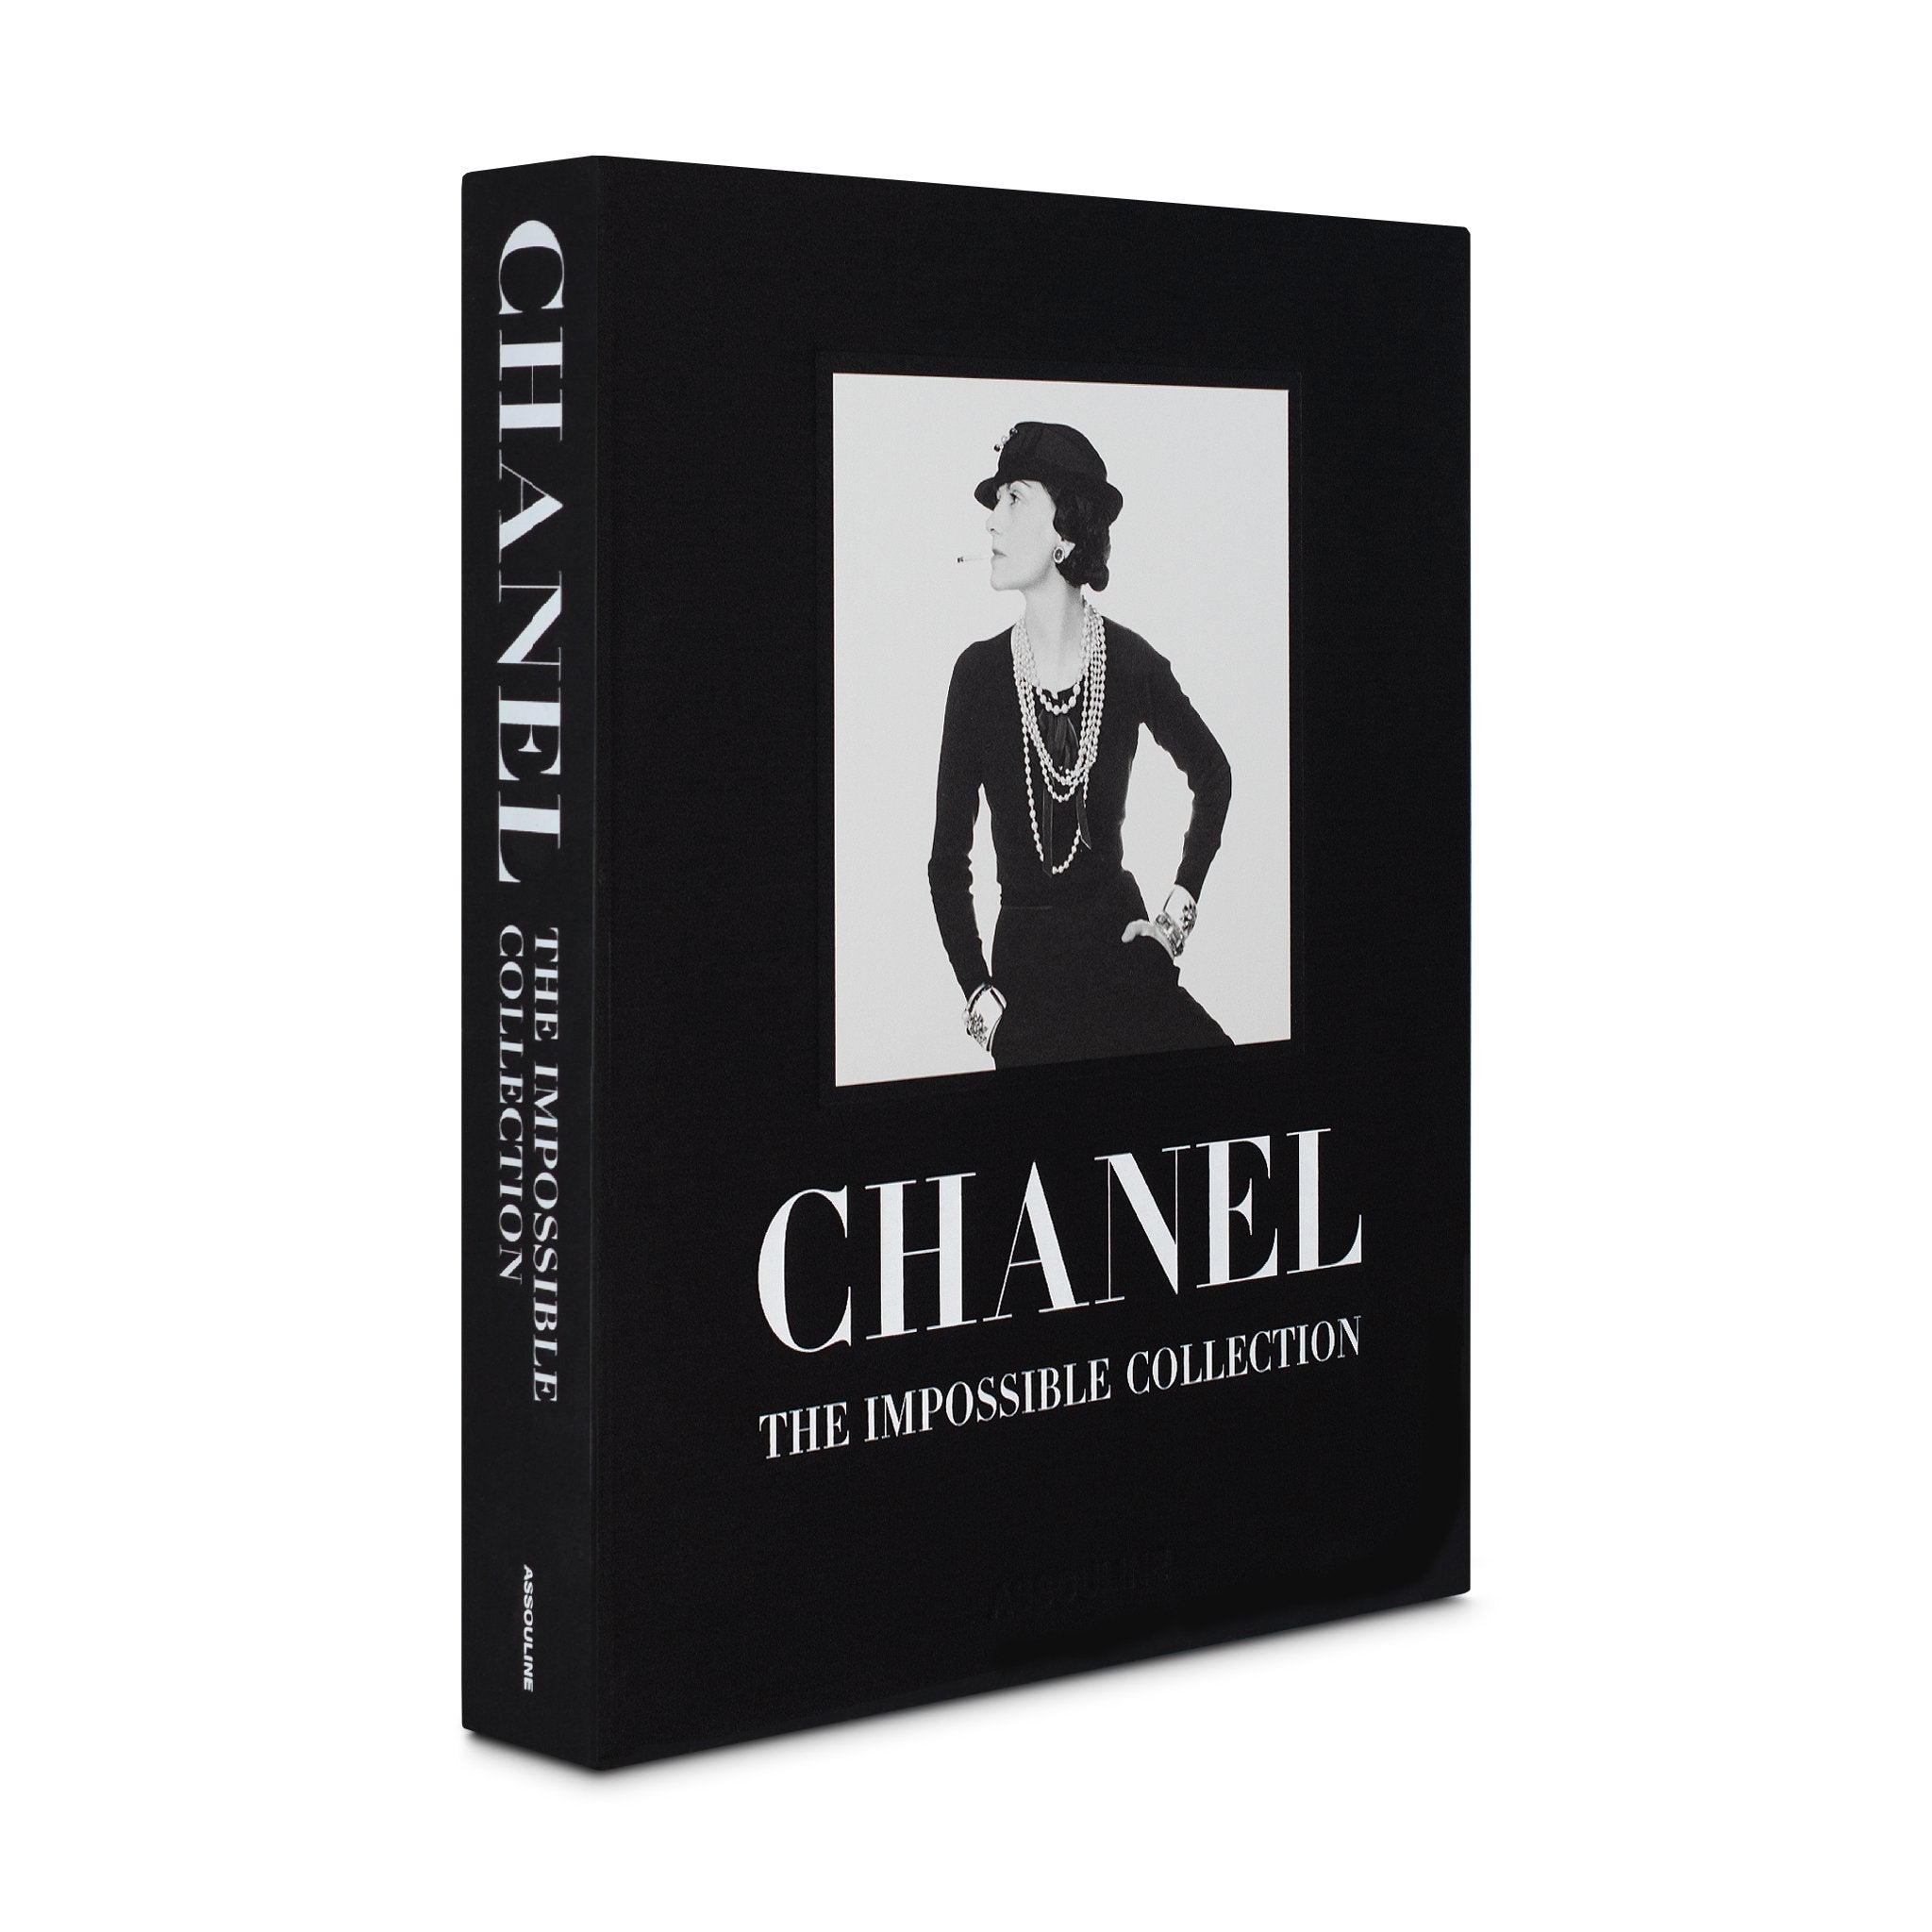 ASSOULINE Chanel: The Impossible Collection Hardcover Book by Alexander Fury